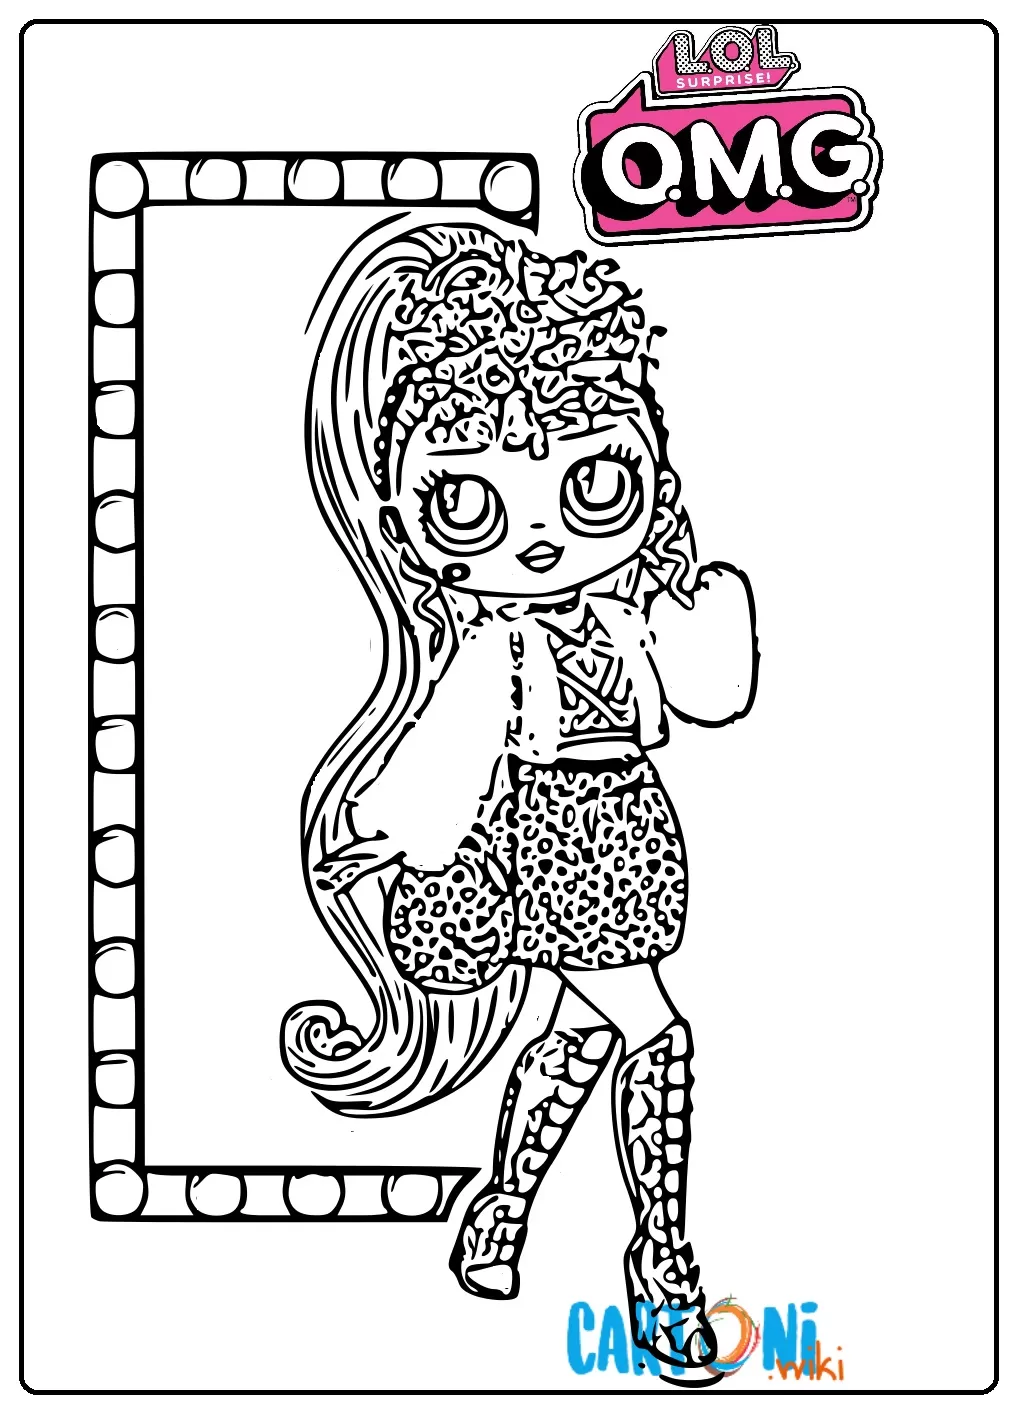 Lady Diva Lol Surprise O.M.G. coloring pages